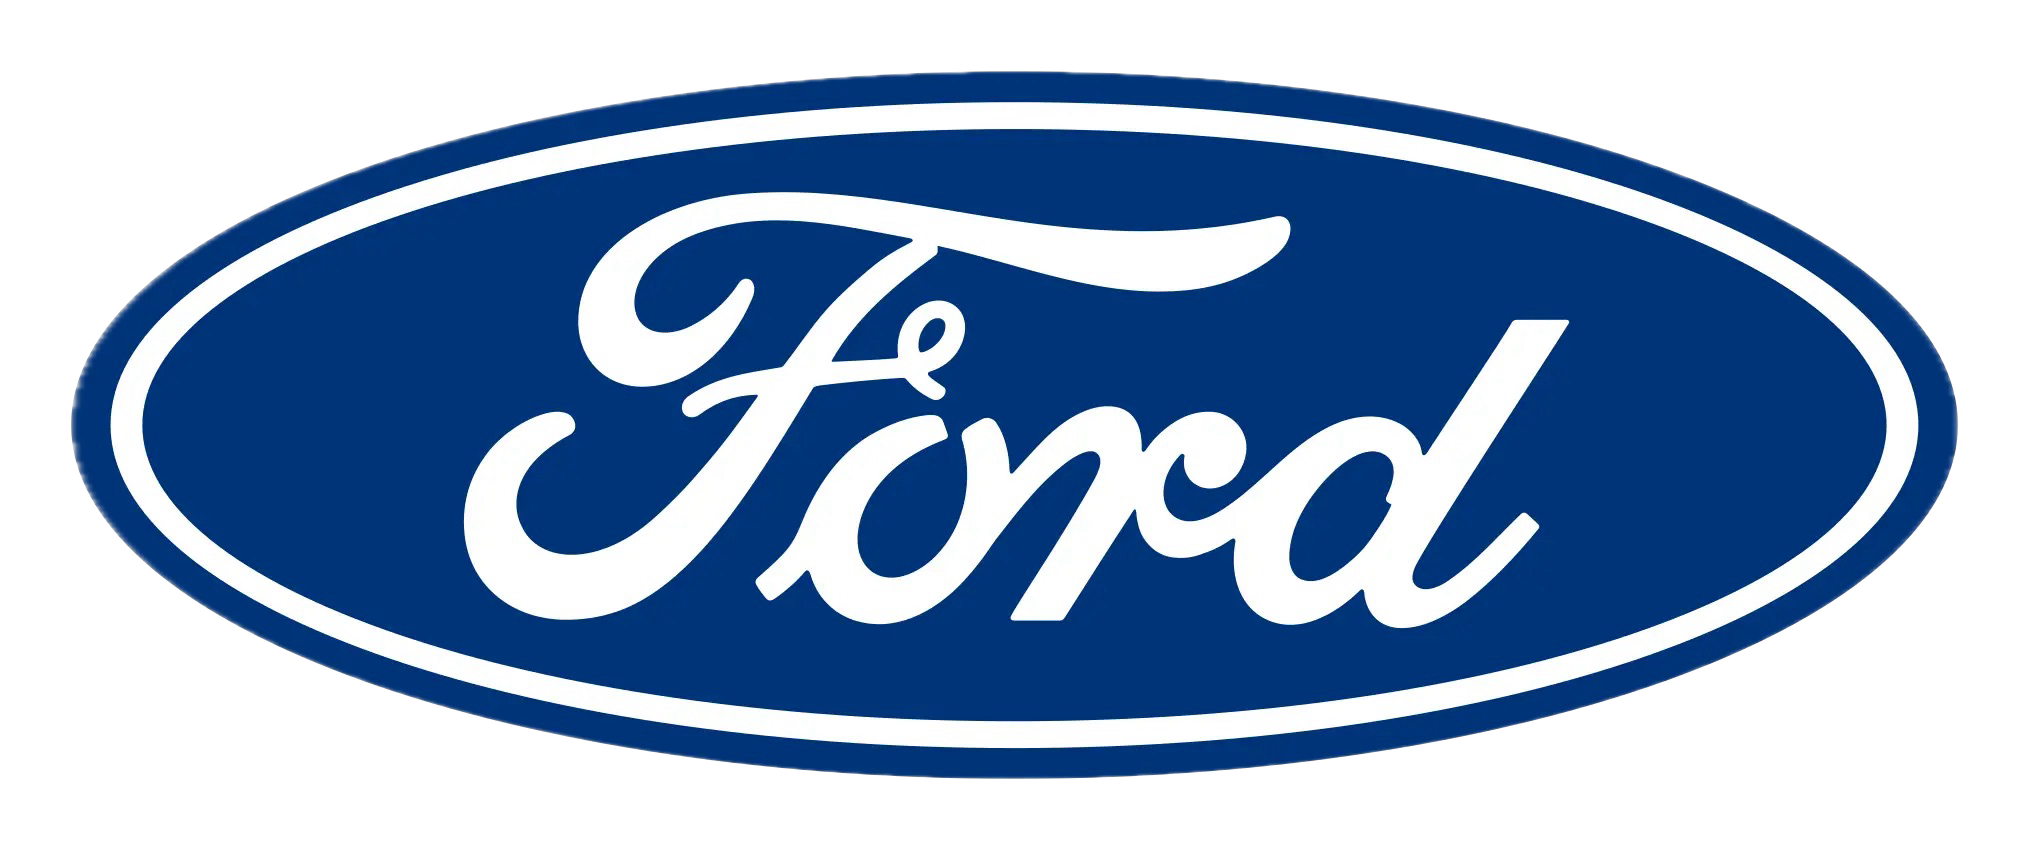 Ford_Background_Removed